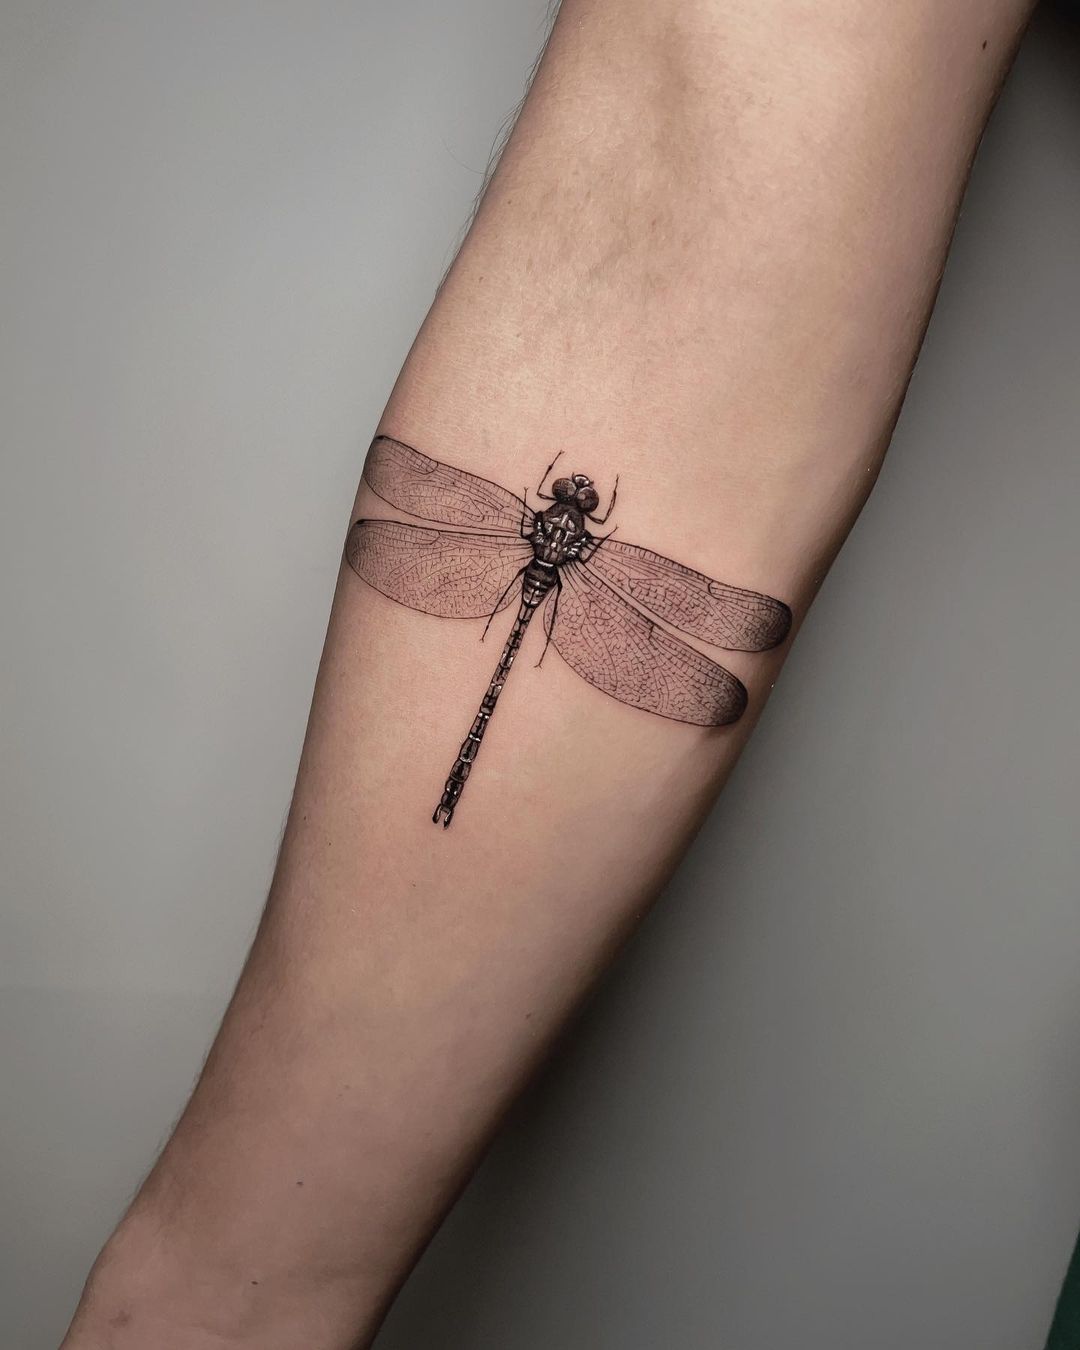 Insect tattoo design by ivanruotolo.ink